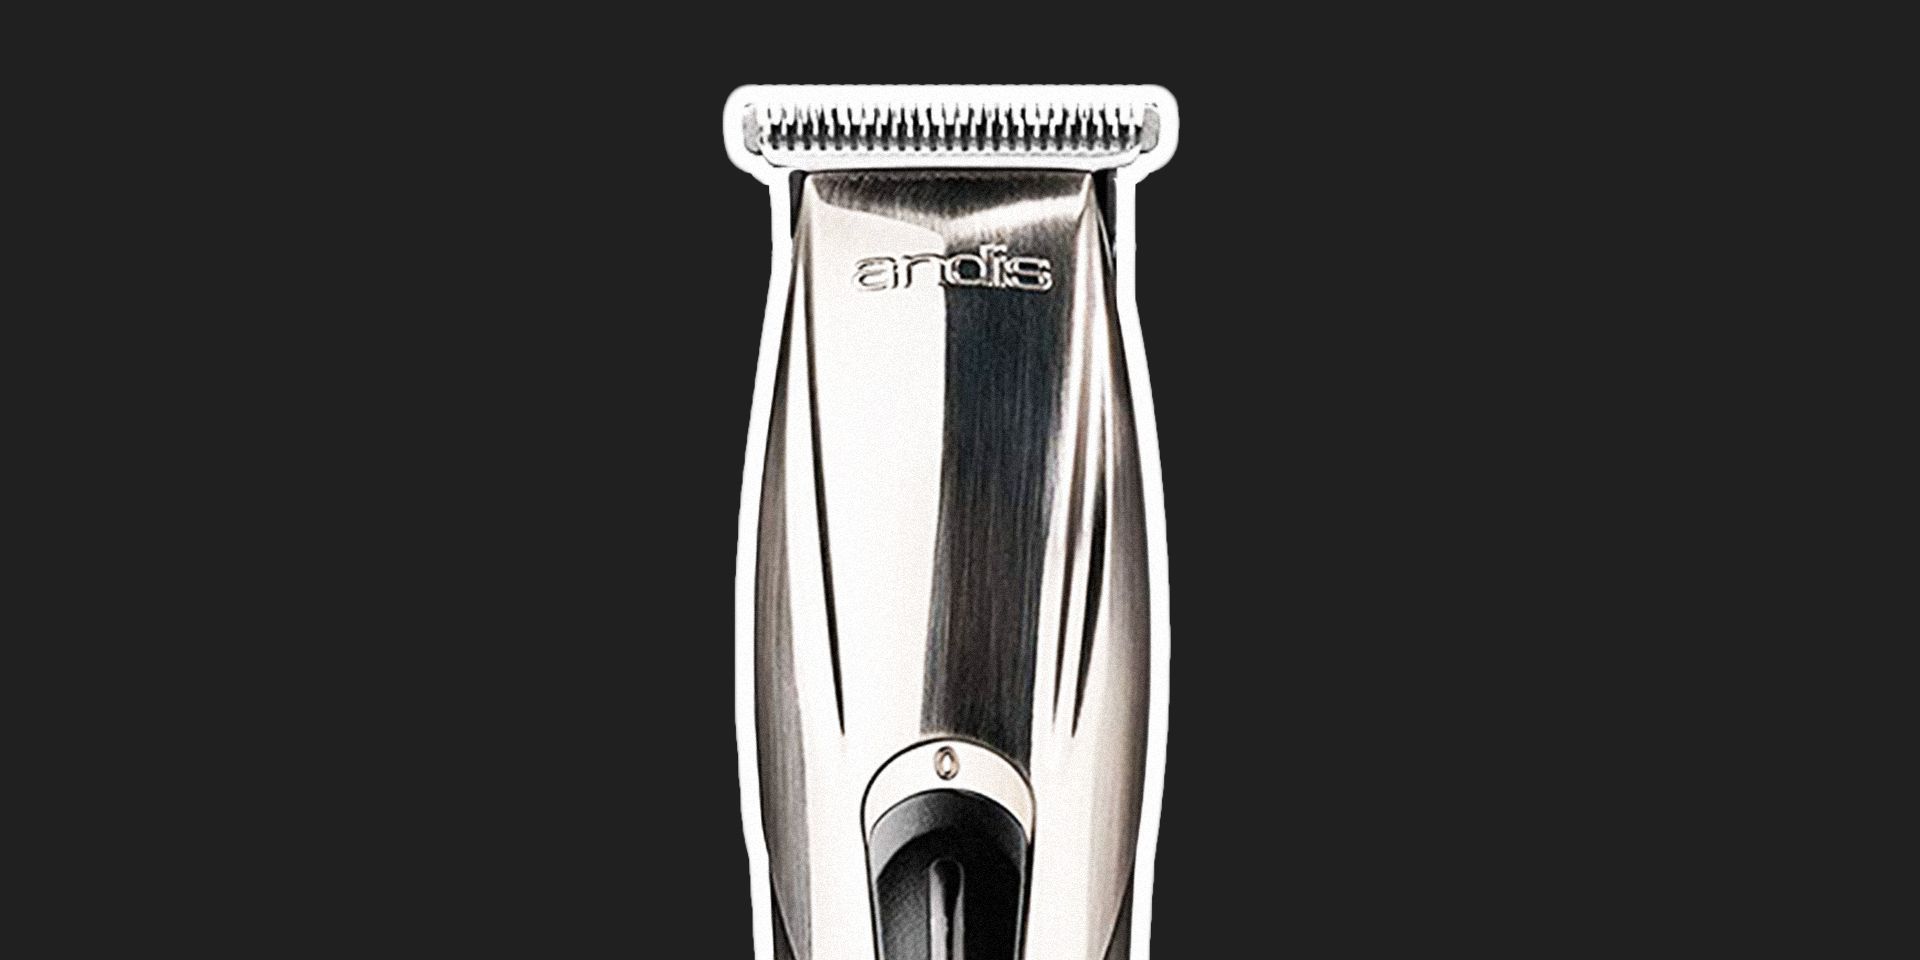 buy hair clippers next day delivery